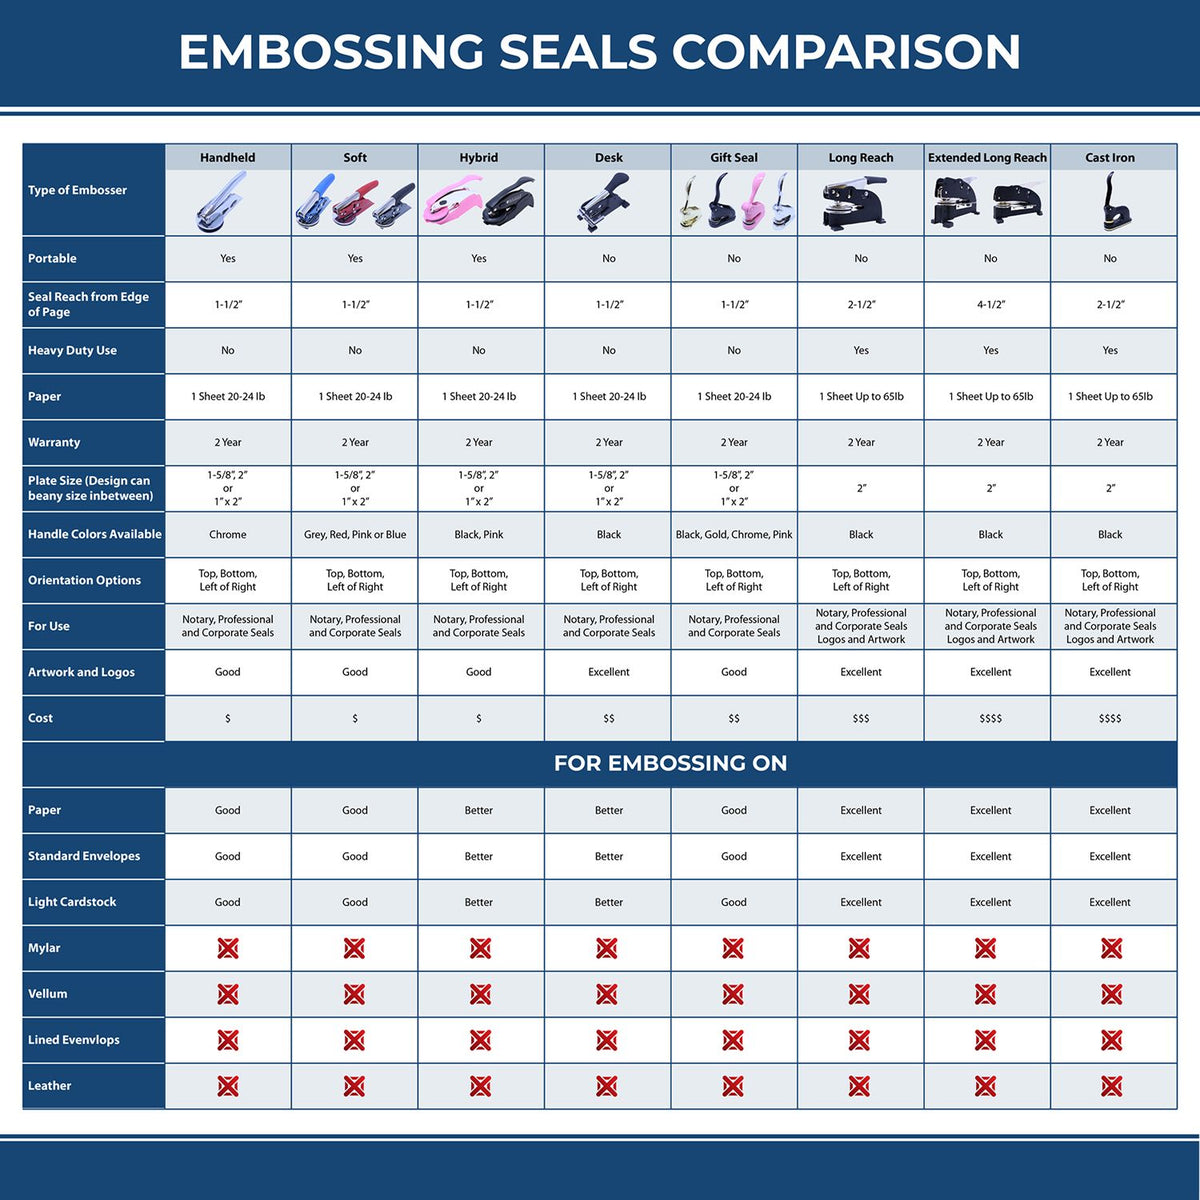 A comparison chart for the different types of mount models available for the Extended Long Reach Minnesota Surveyor Embosser.